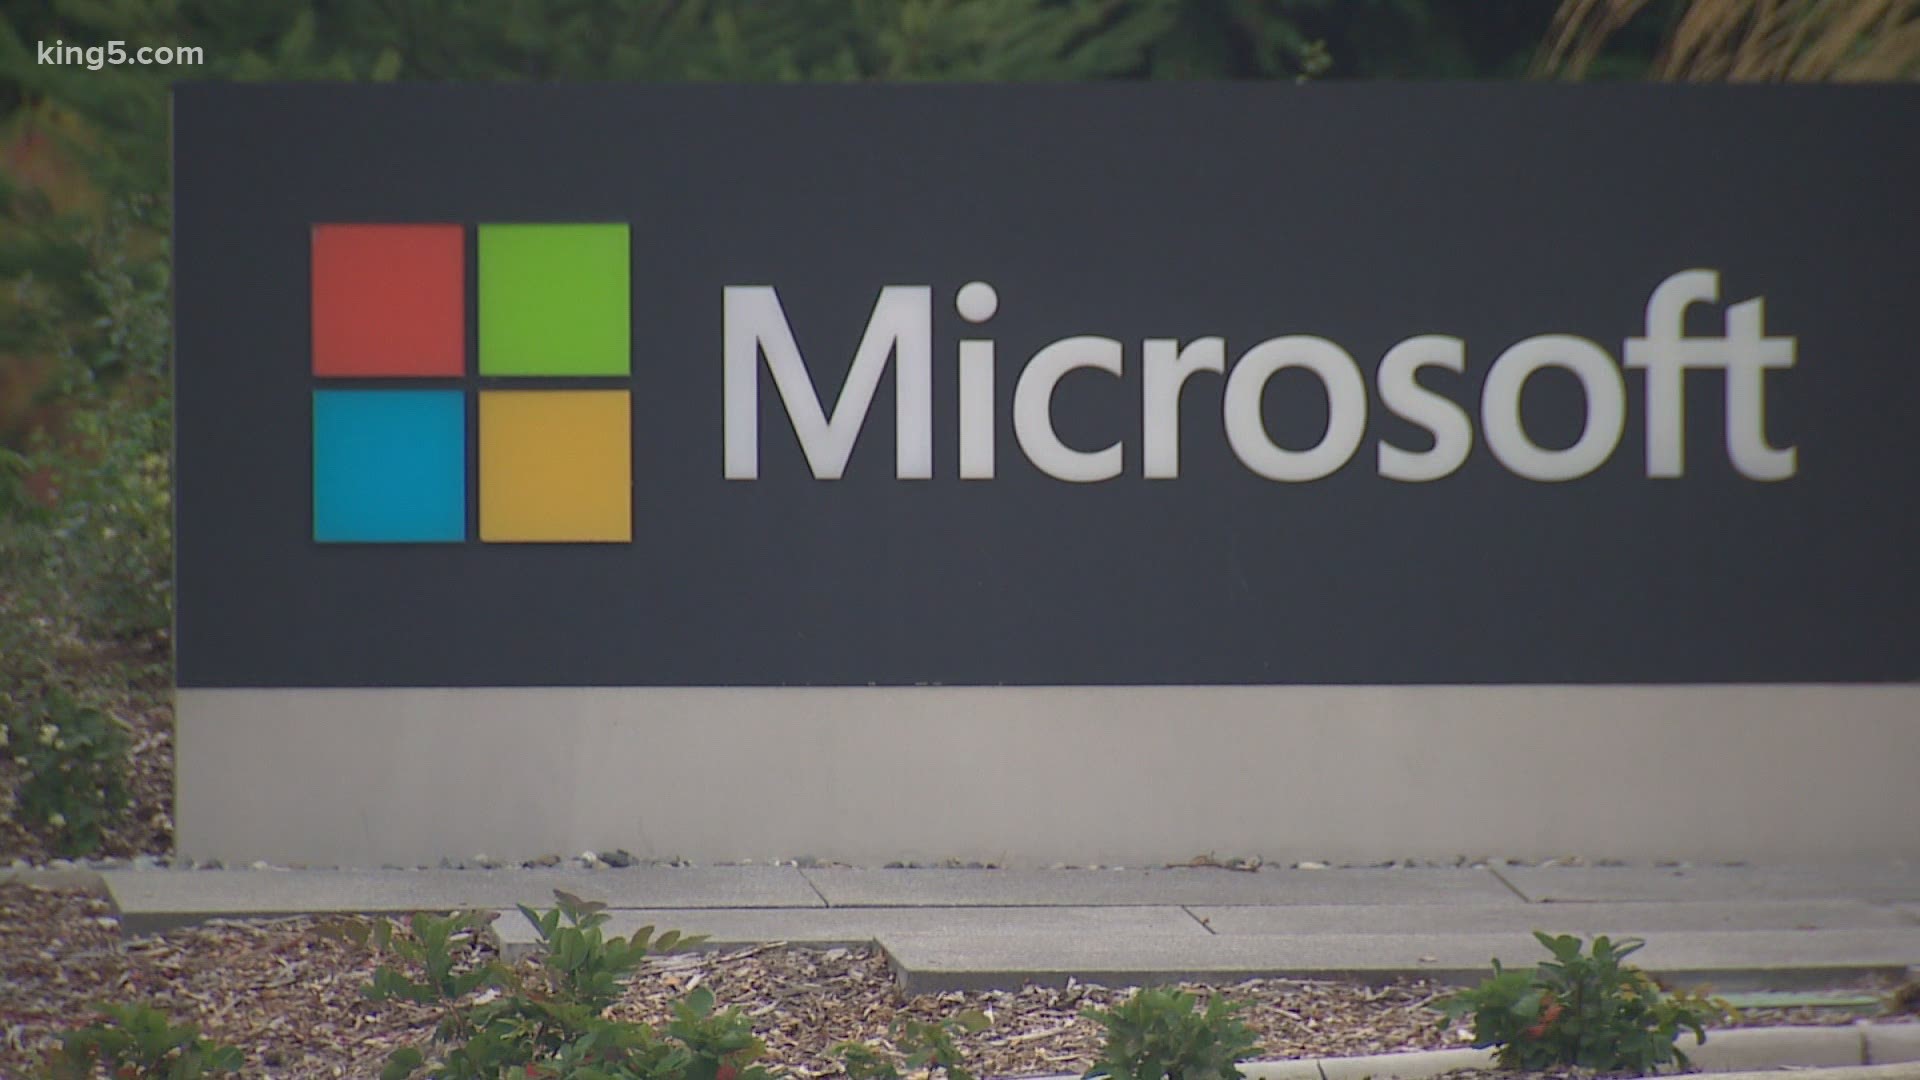 Redmond-based Microsoft is adopting a hybrid model for employees to work remotely, which worries some Redmond shops and restaurants who rely on their business.